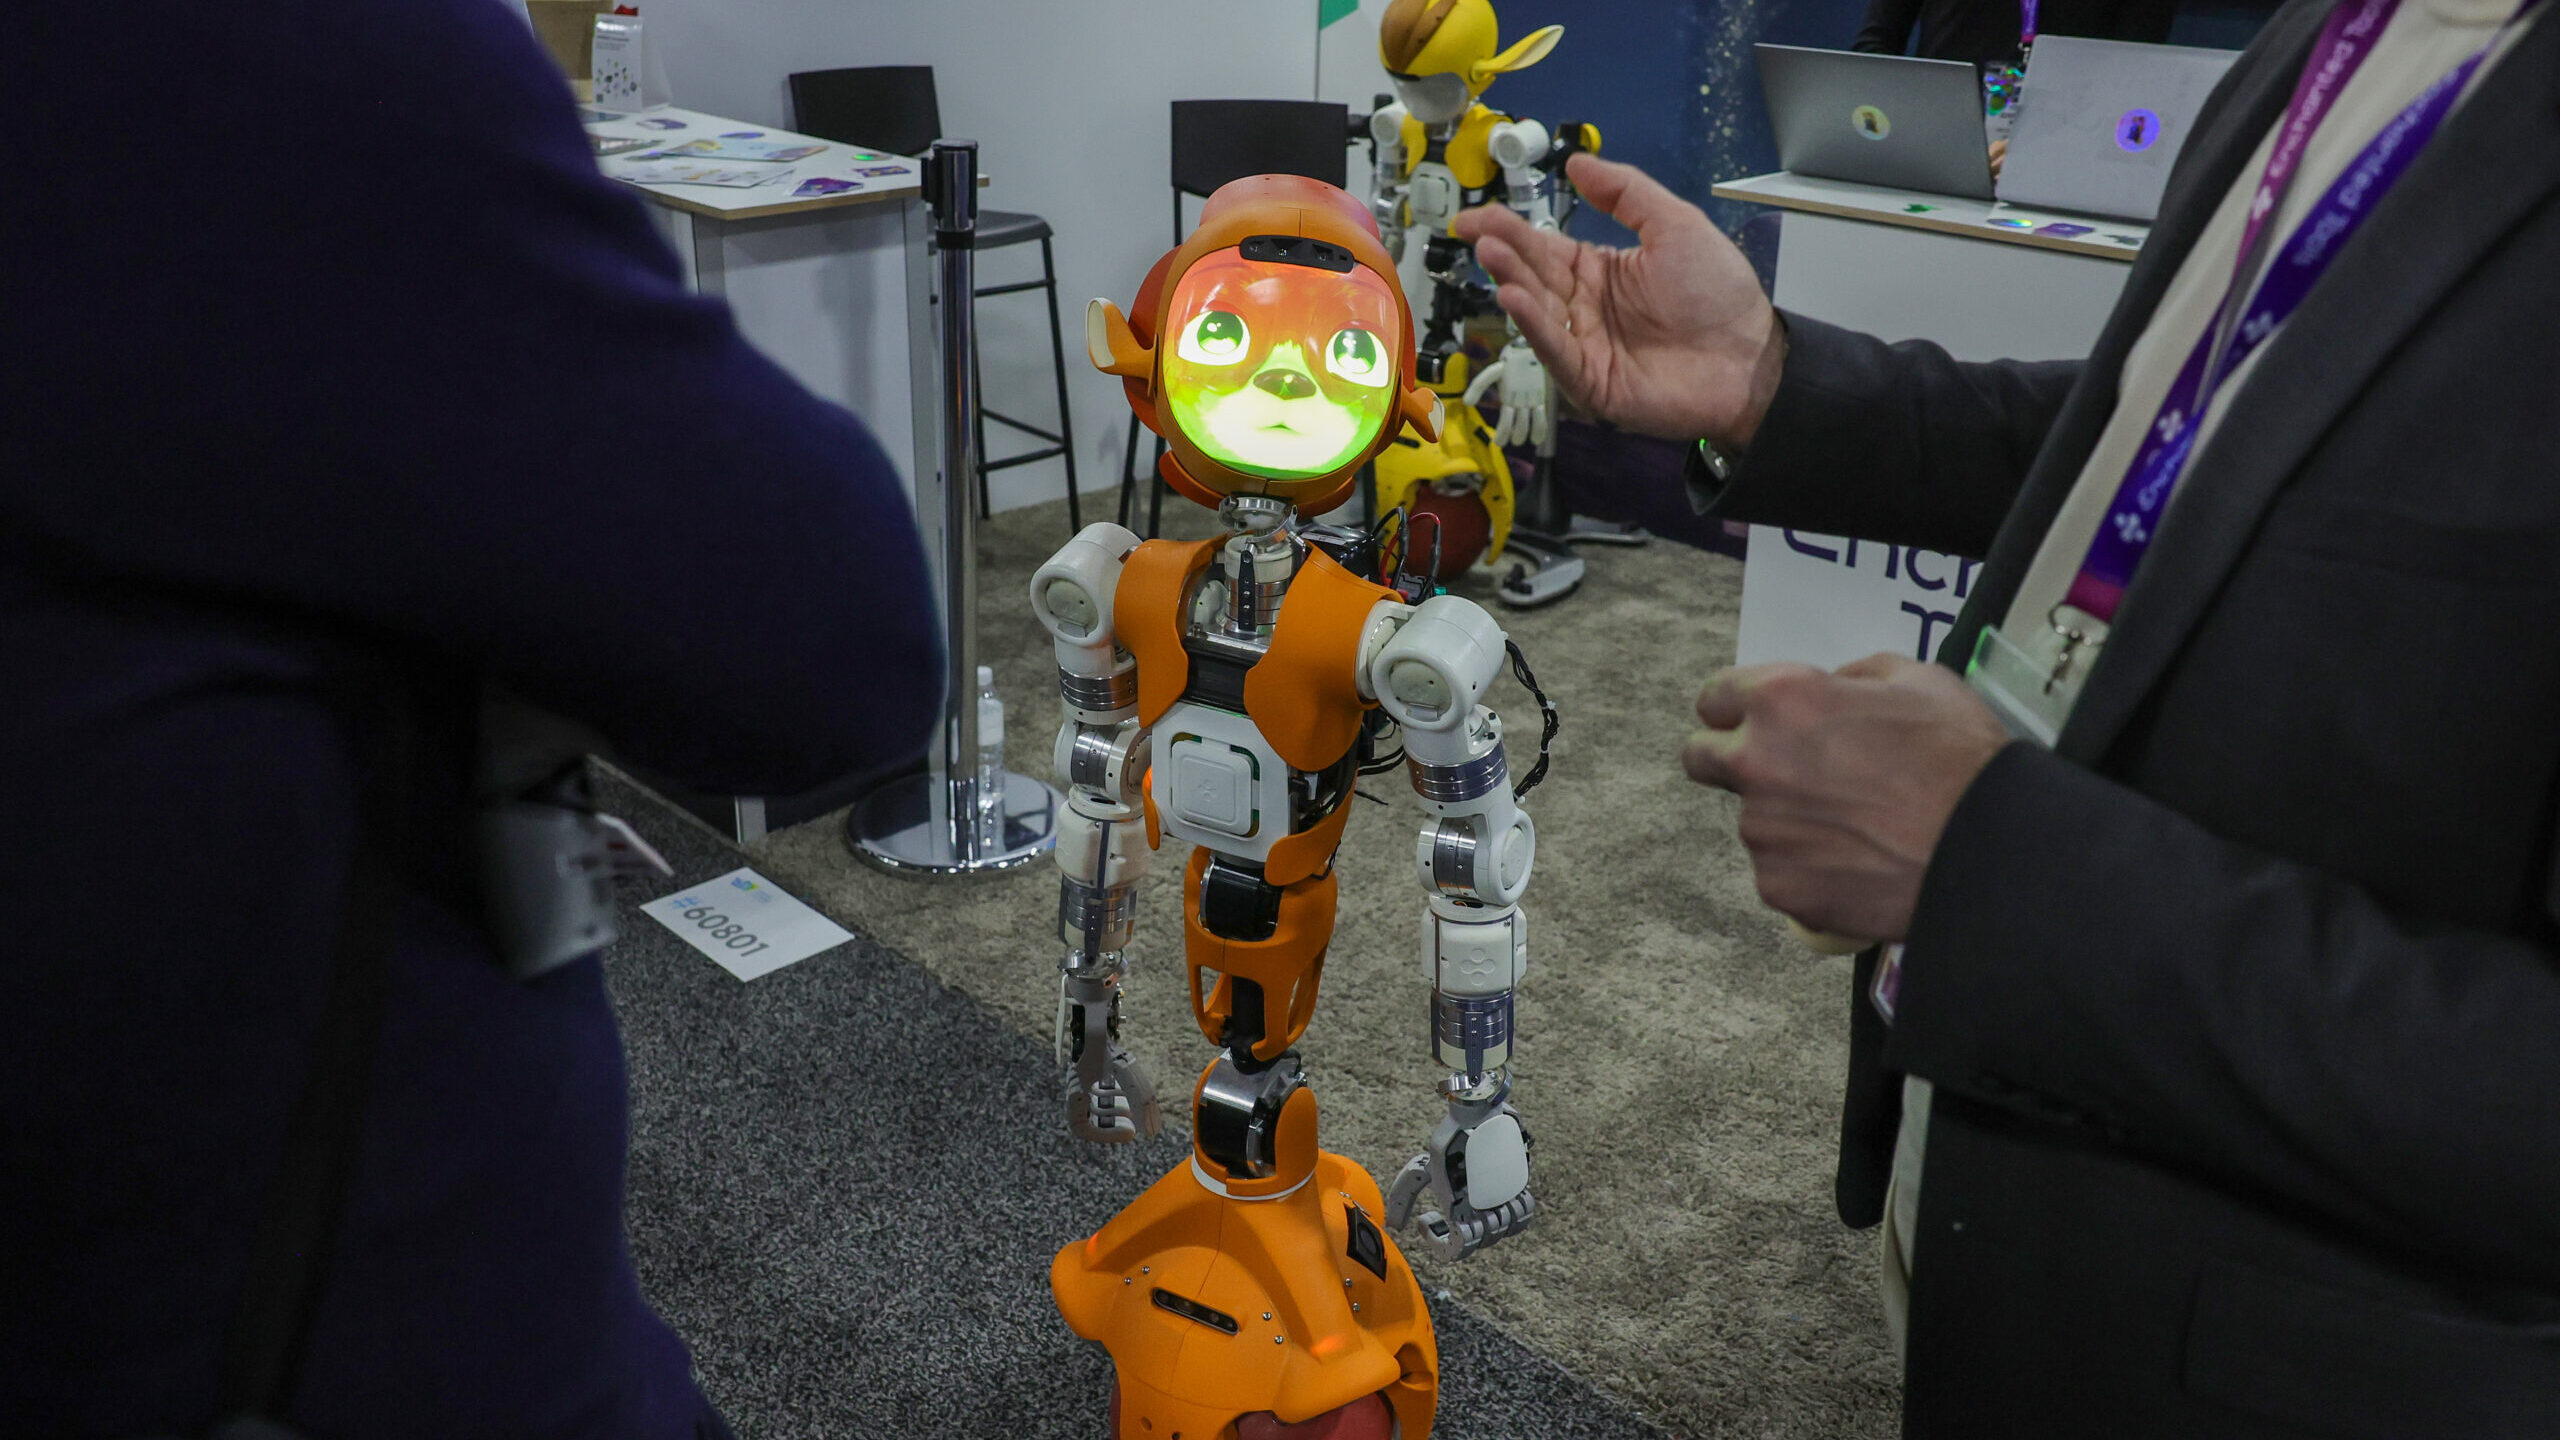 A Mirokai social logistics robot by Enchanted Tools uses its AI to interact with attendees in real ...